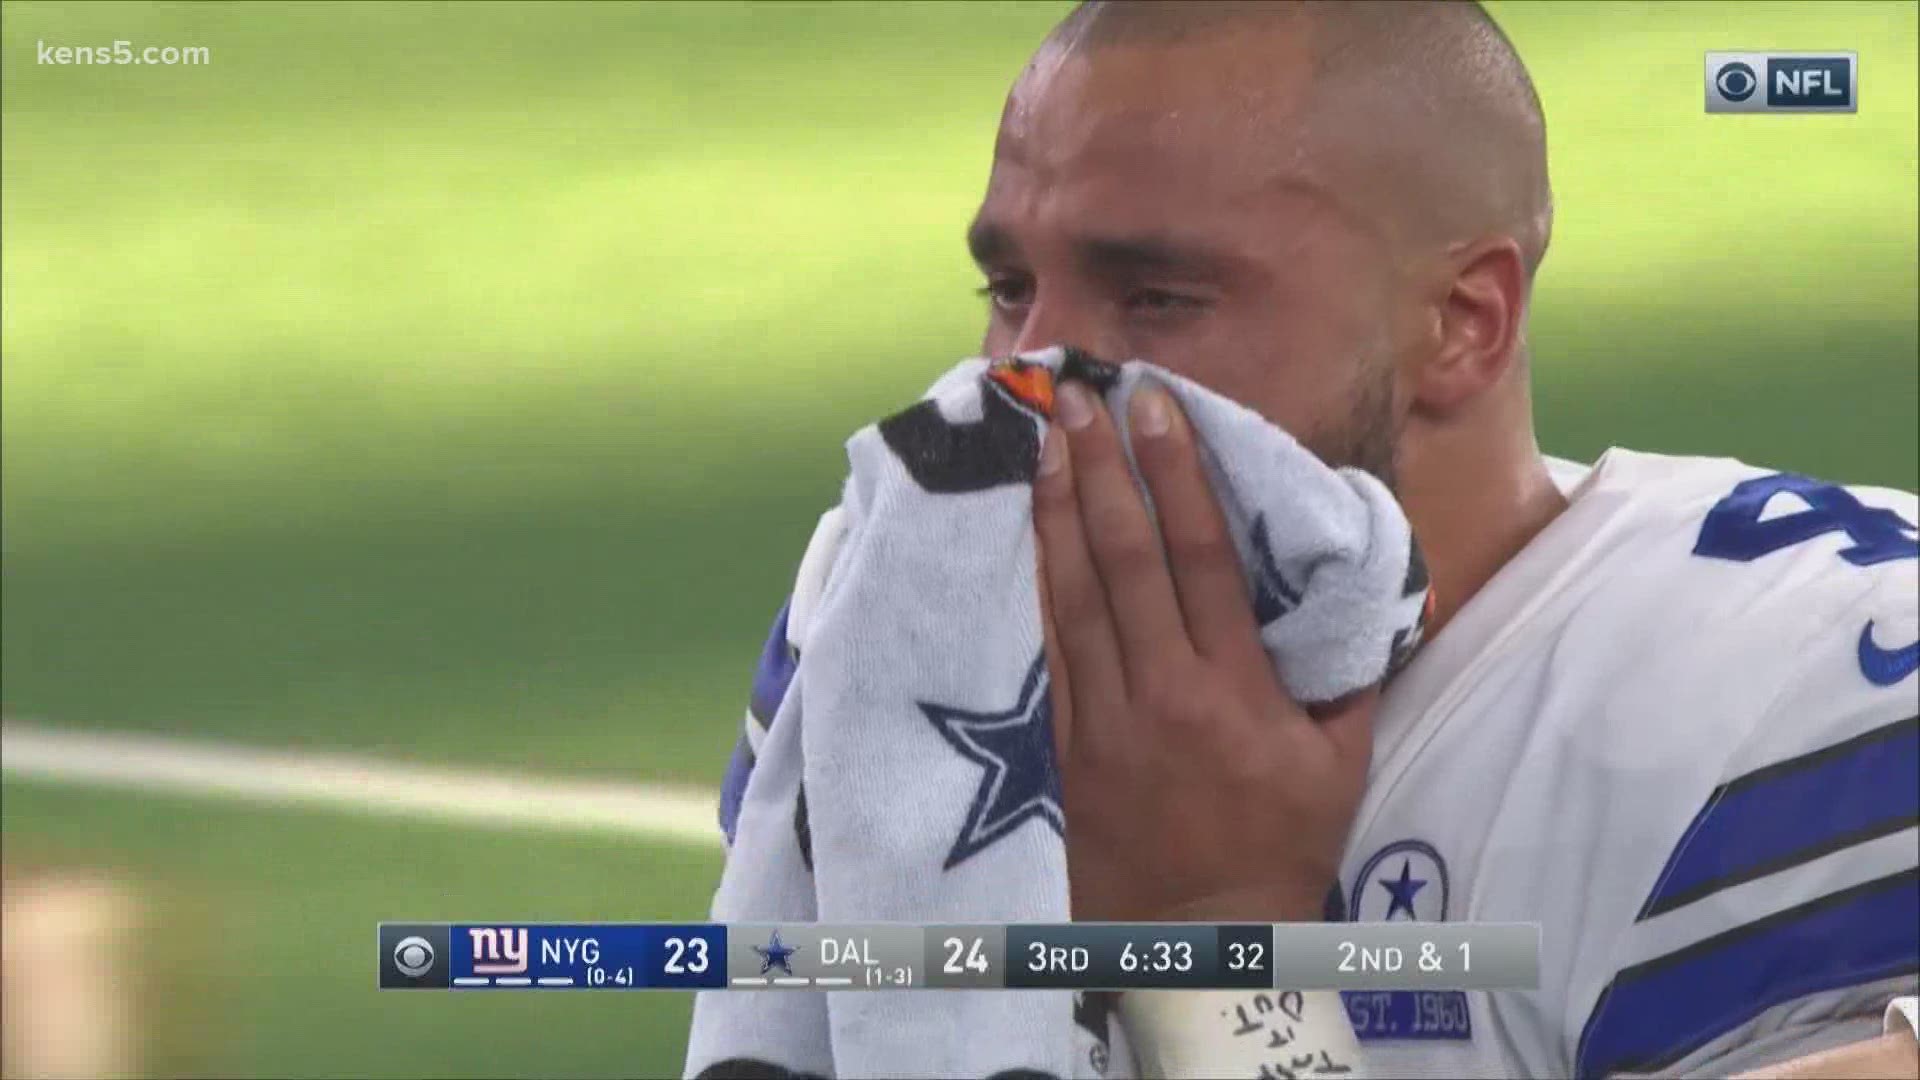 Words of encouragement are pouring in for Dallas Cowboy QB Dak Prescott after this season ending injury.